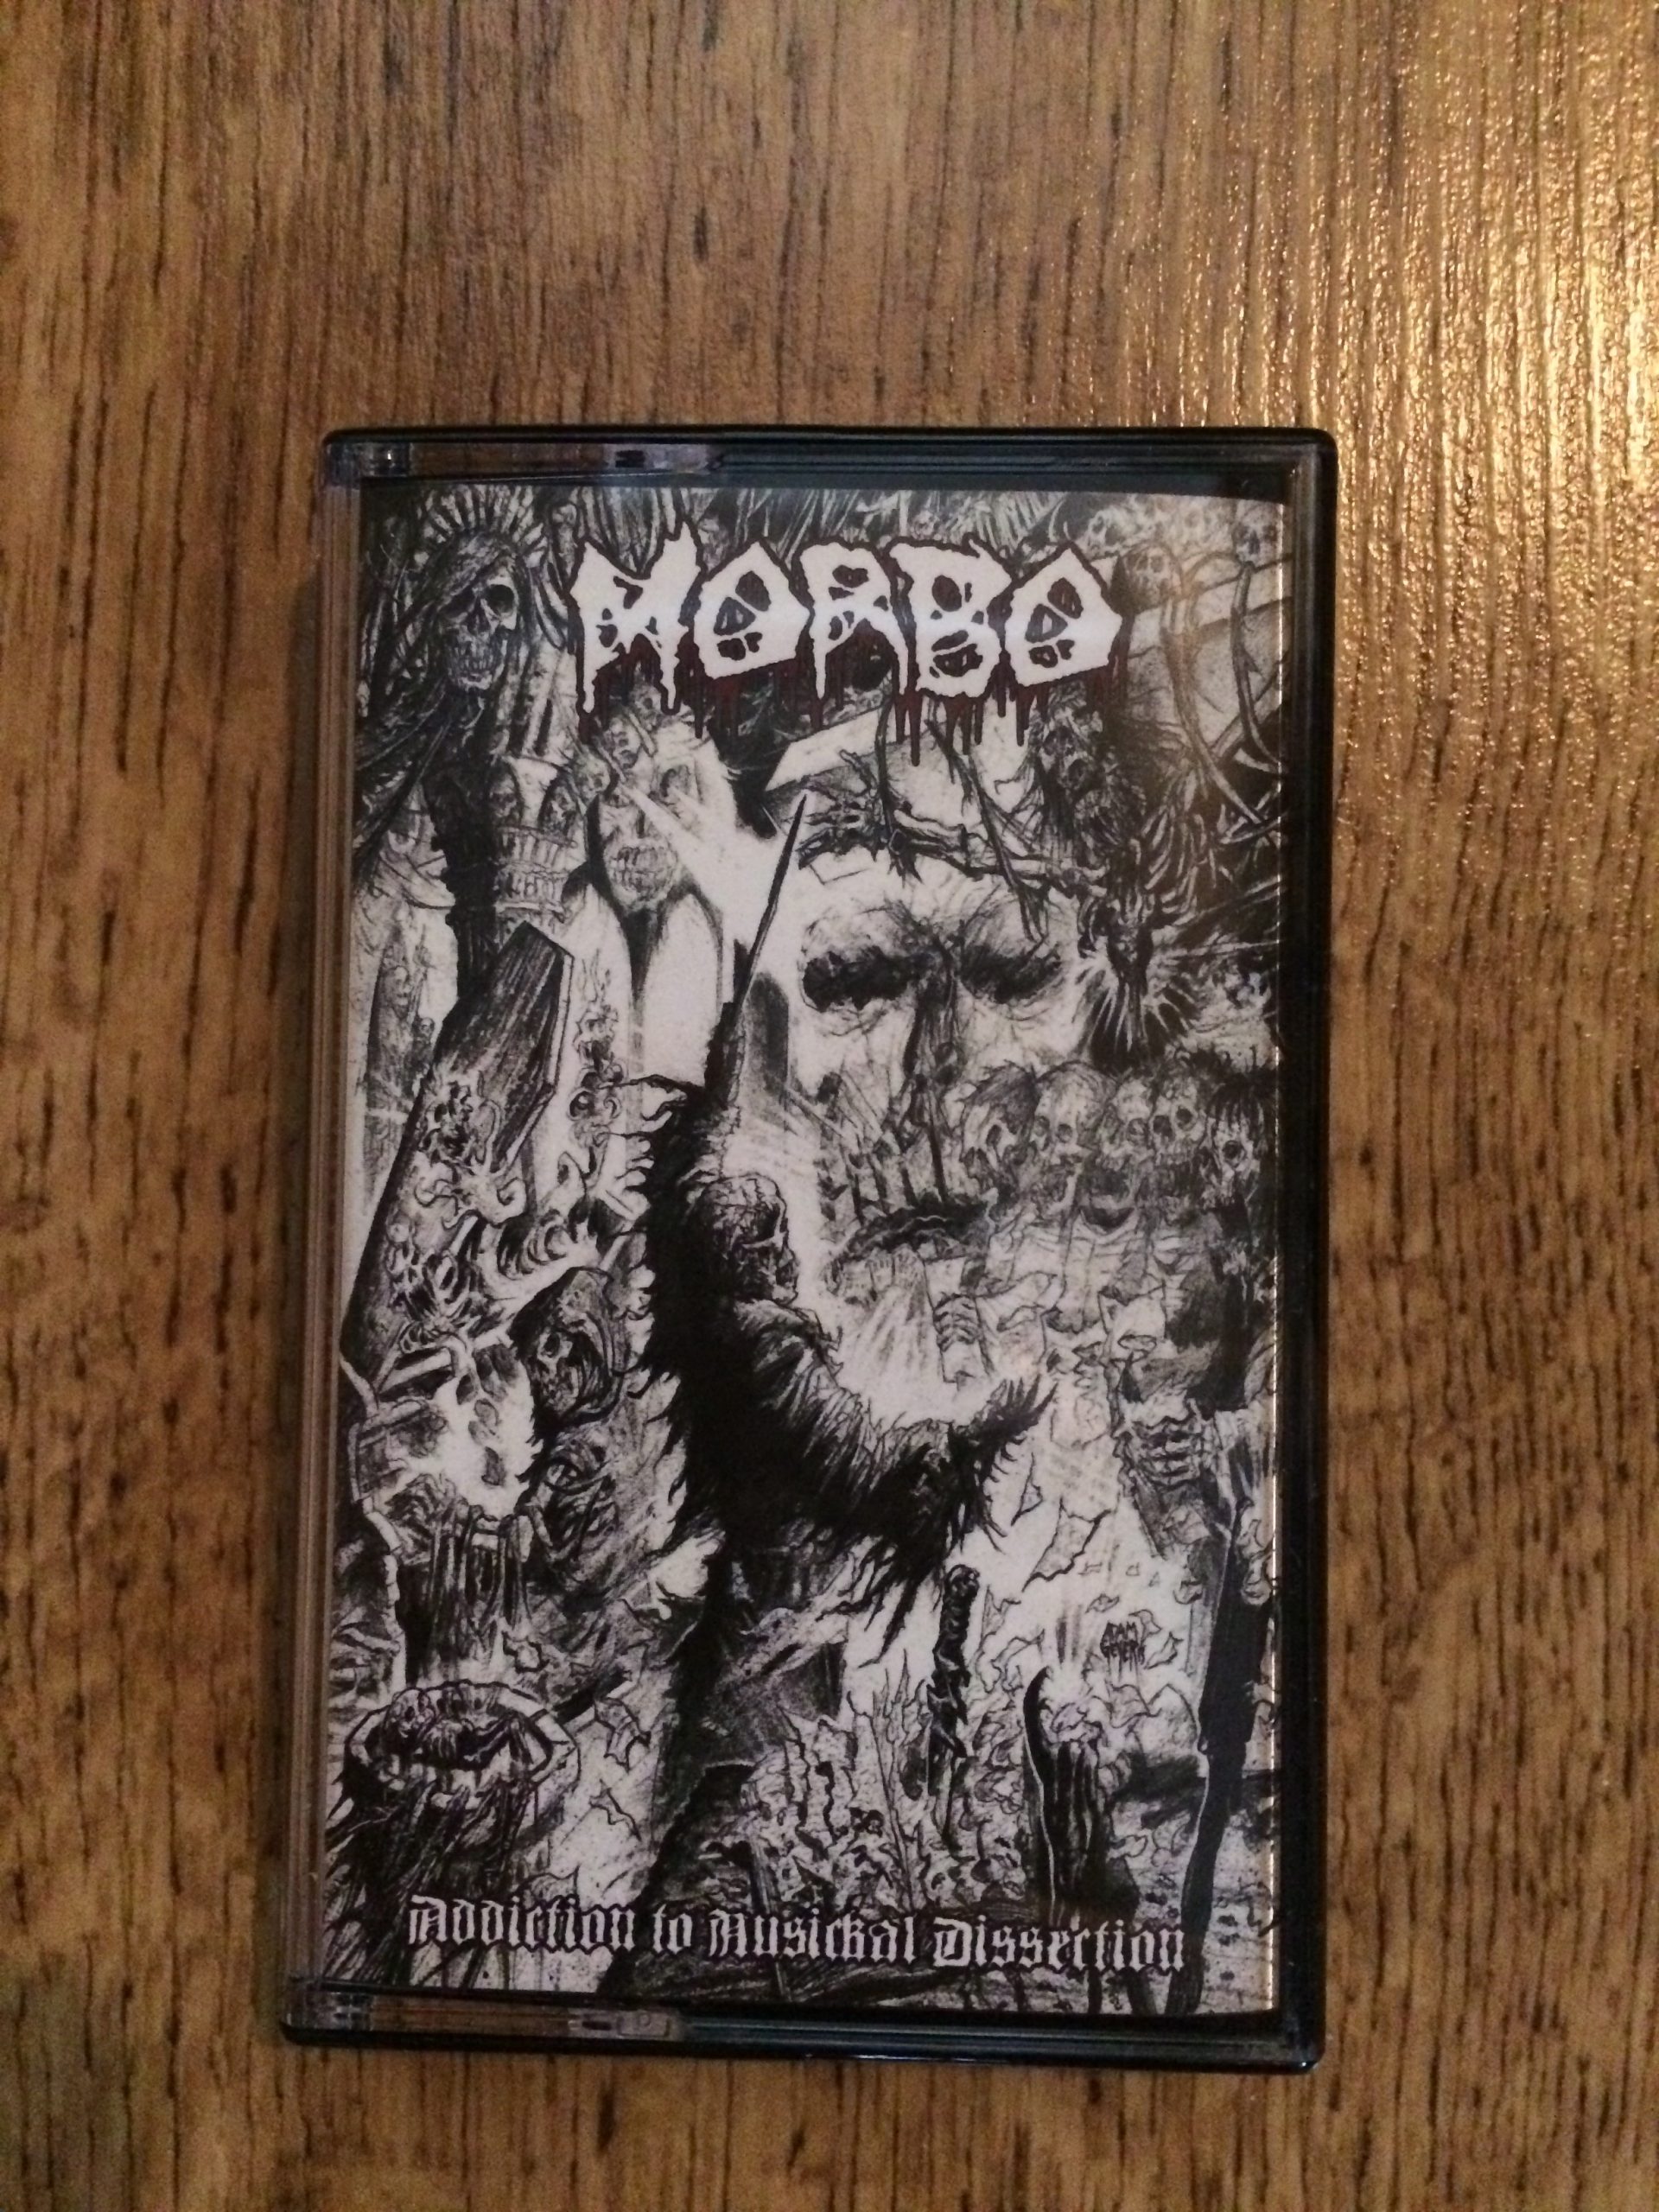 Photo of the Morbo - "Addiction to Musickal Dissection" MC